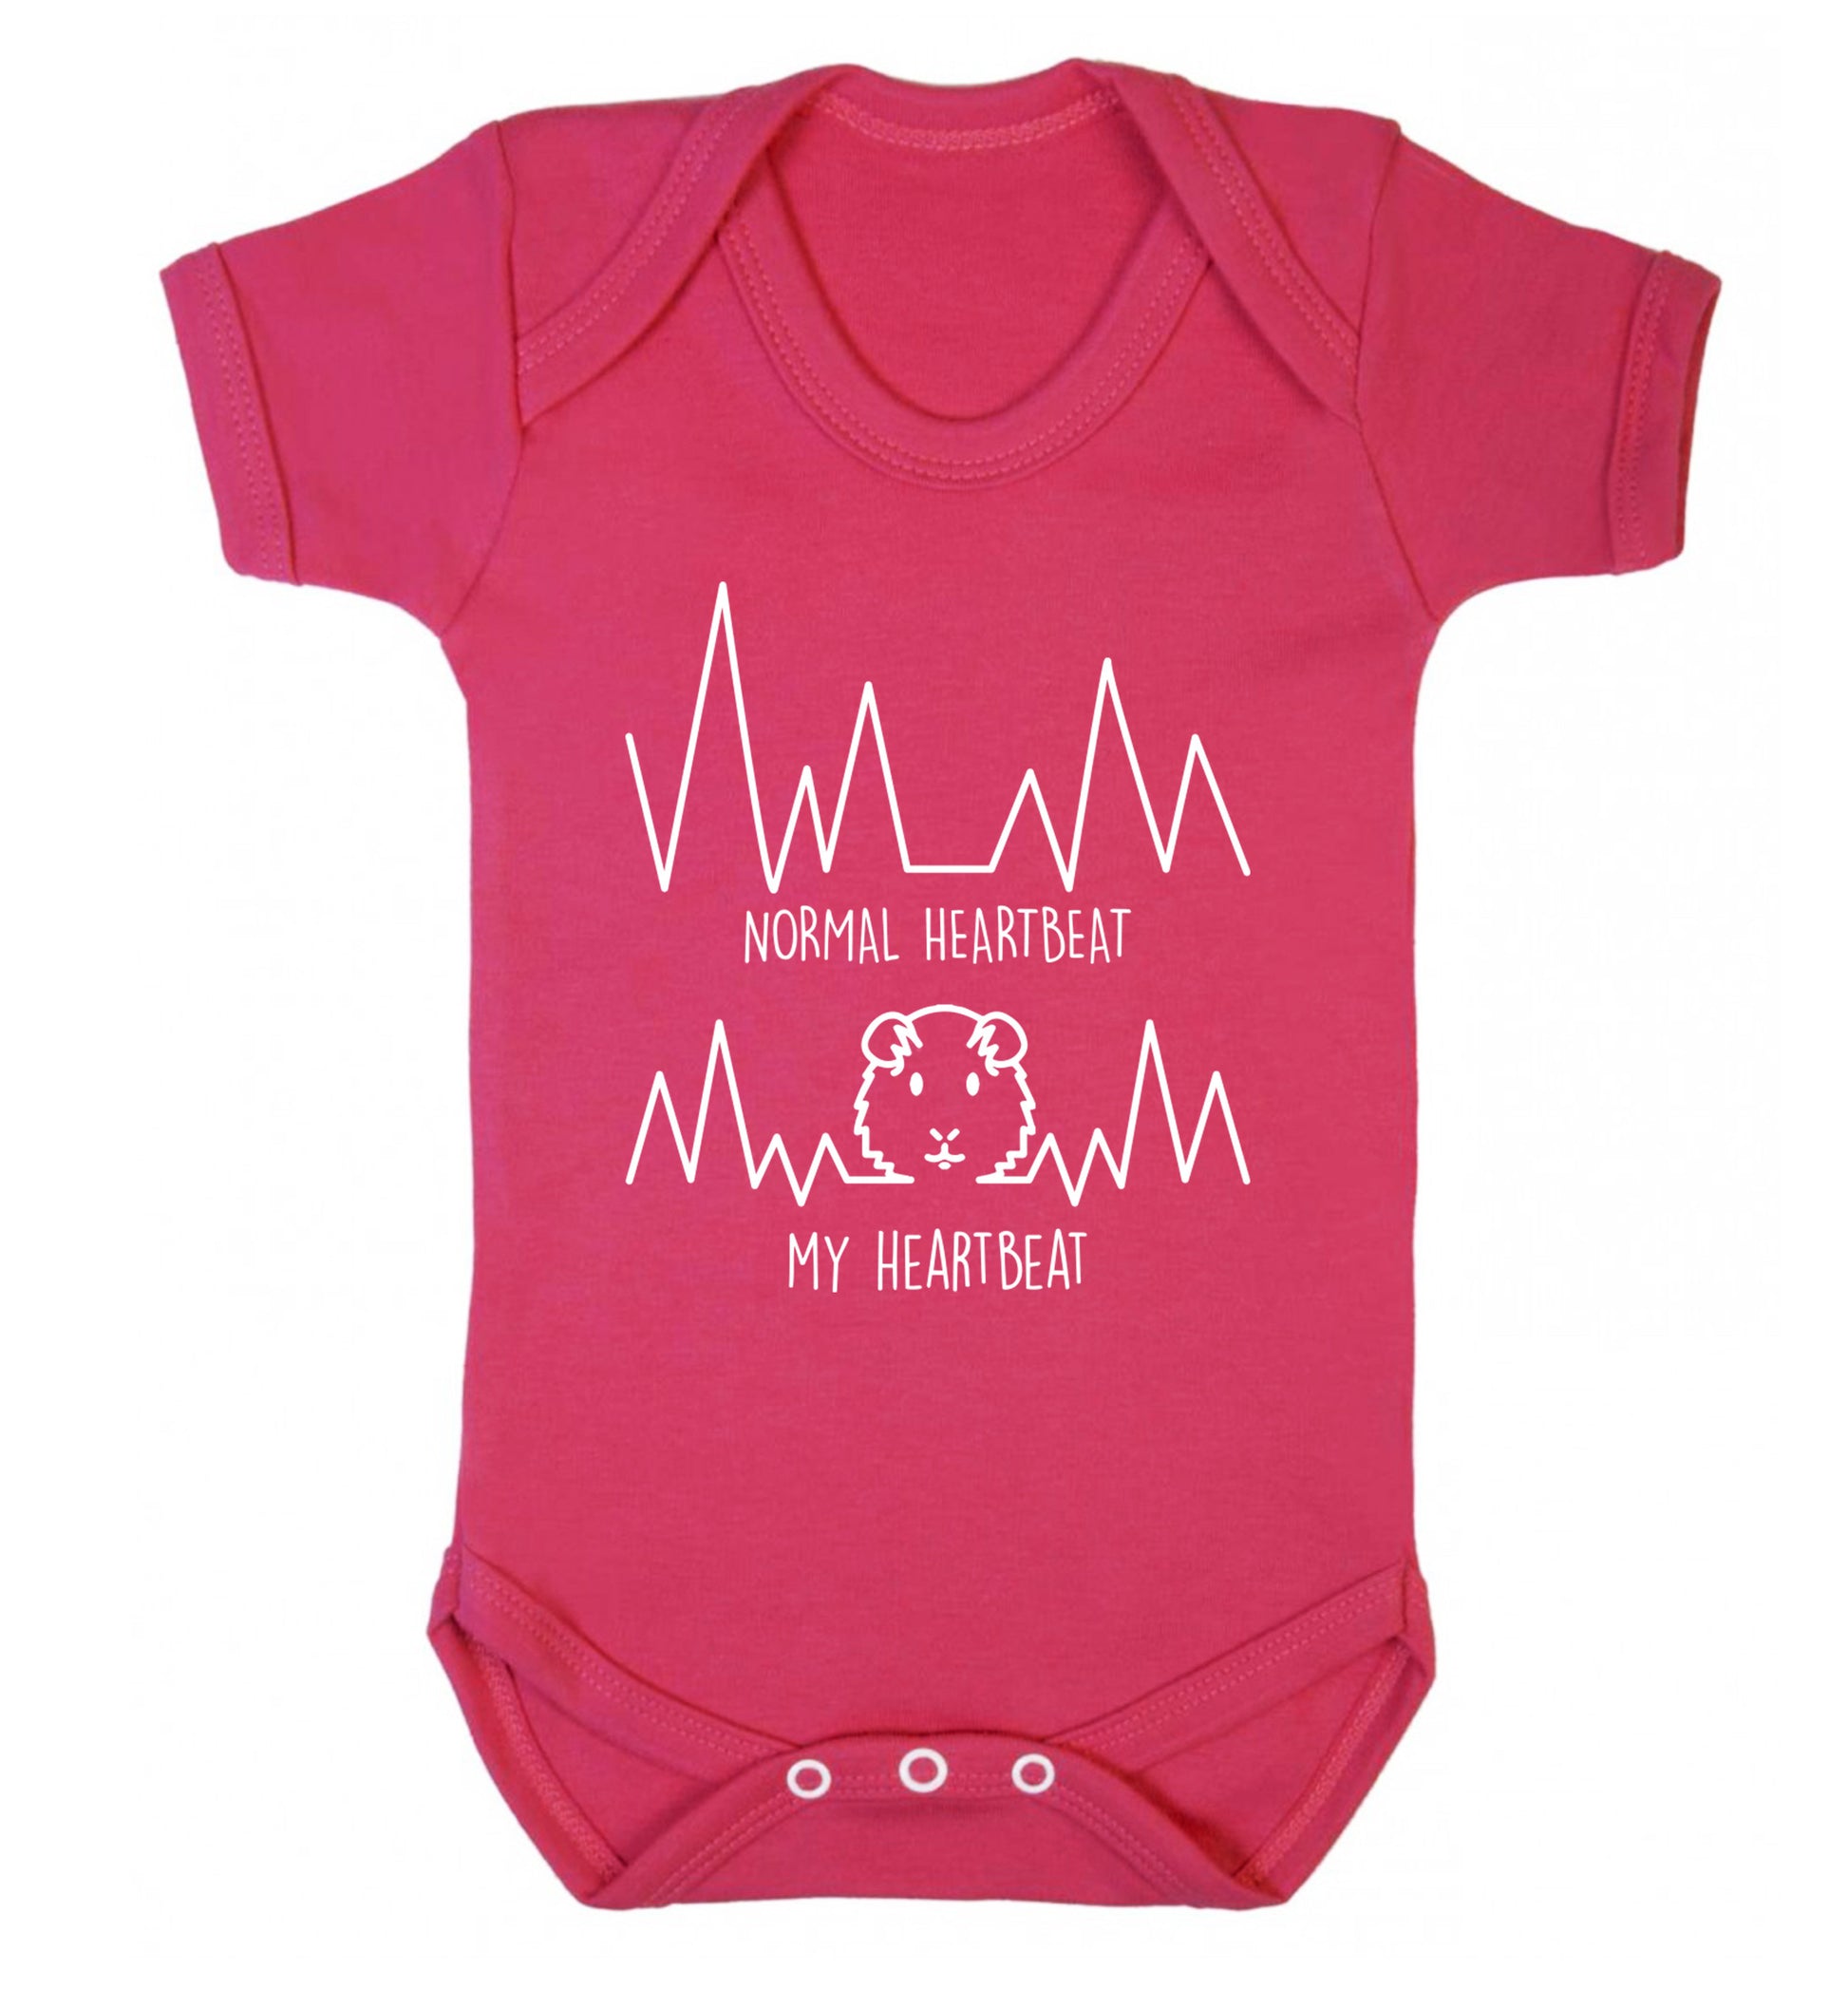 Normal heartbeat vs my heartbeat guinea pig lover Baby Vest dark pink 18-24 months